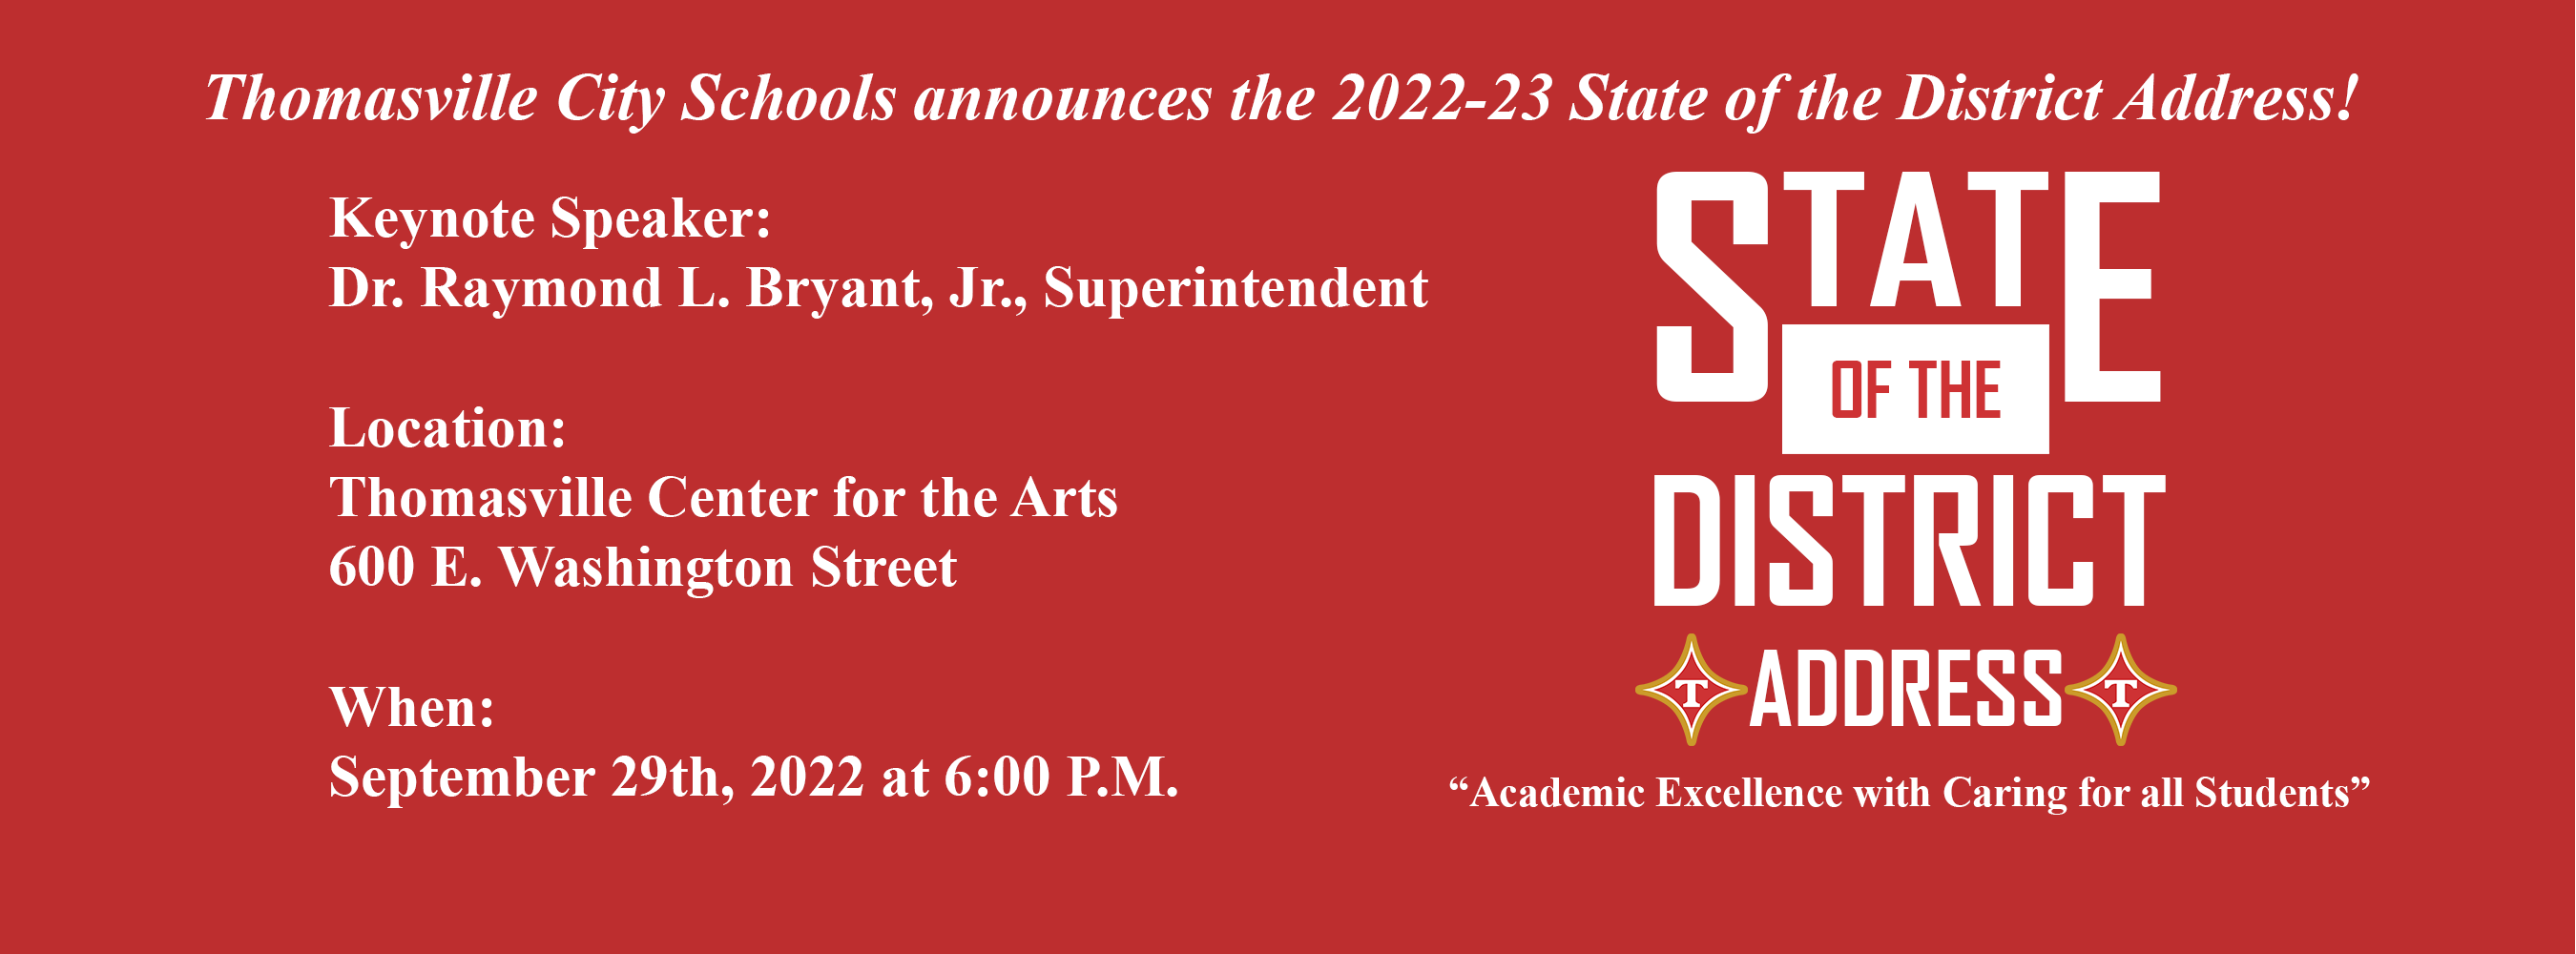 2022 - 2023 State of the District Address